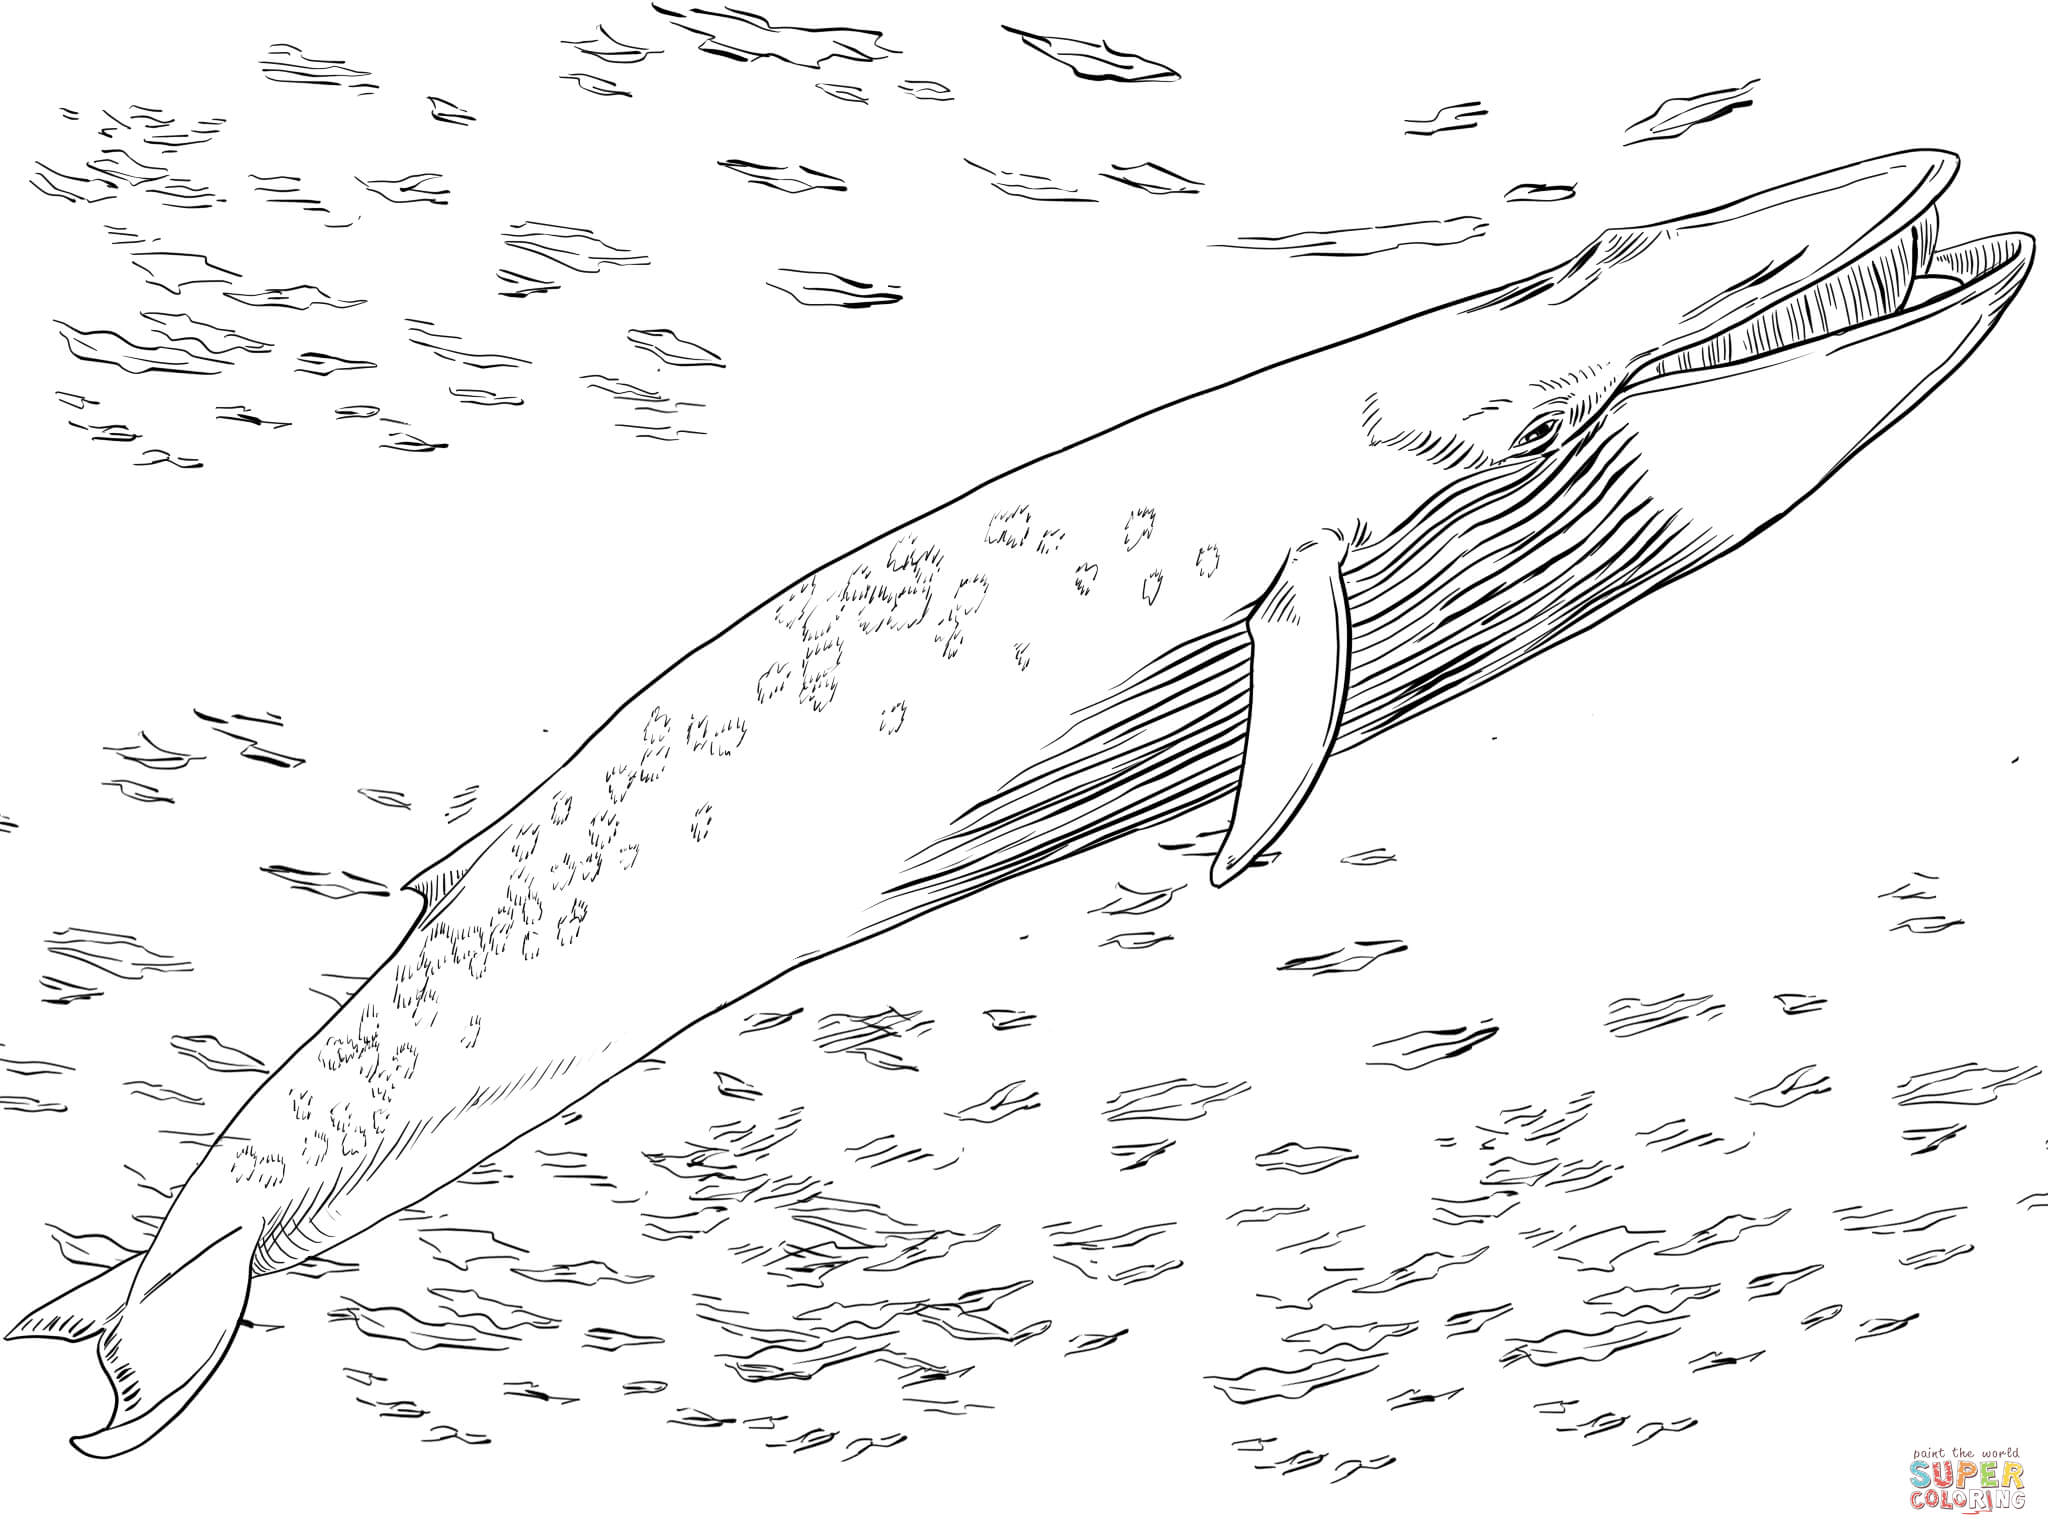 Blue Whale coloring #5, Download drawings